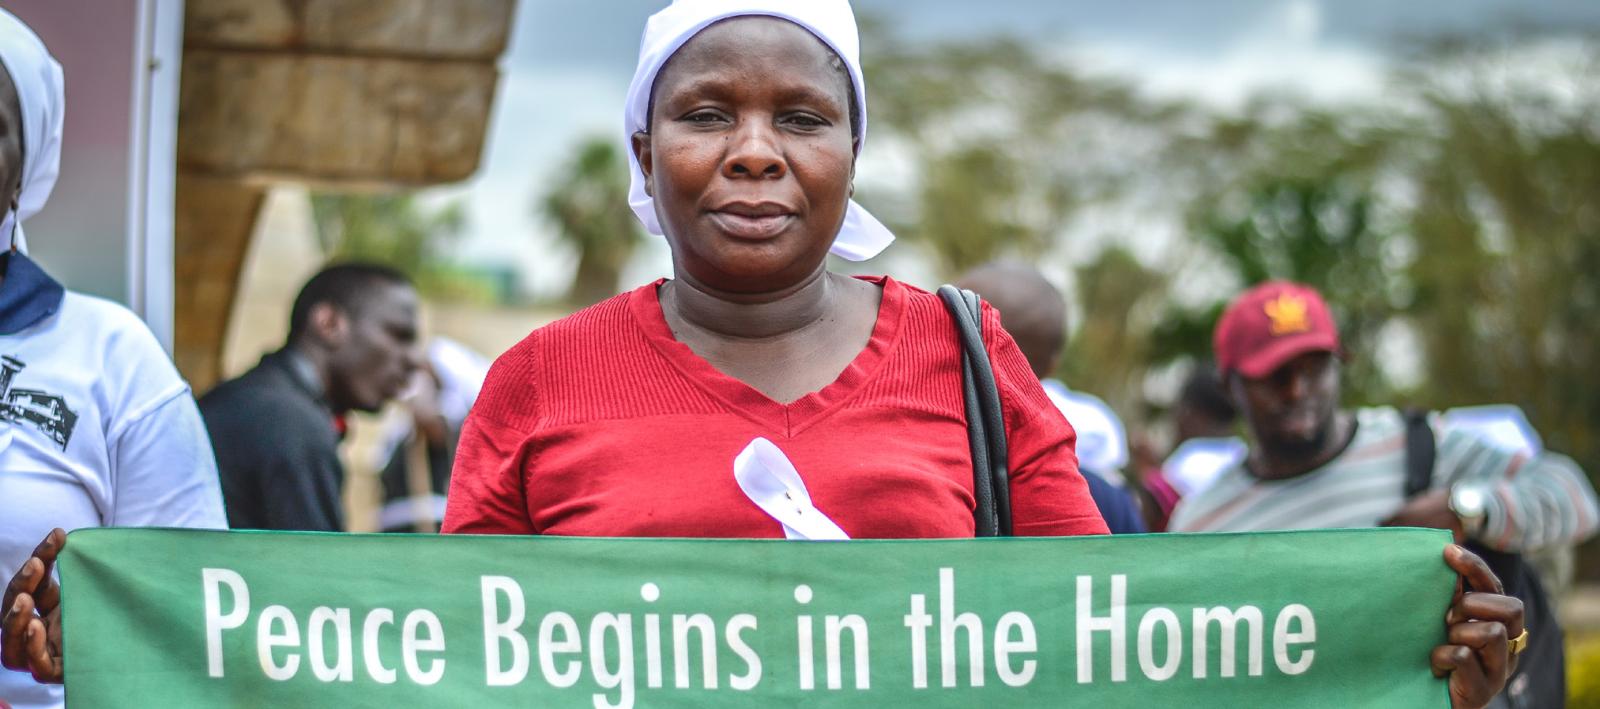 A Kenyan woman holding peace campaign banner